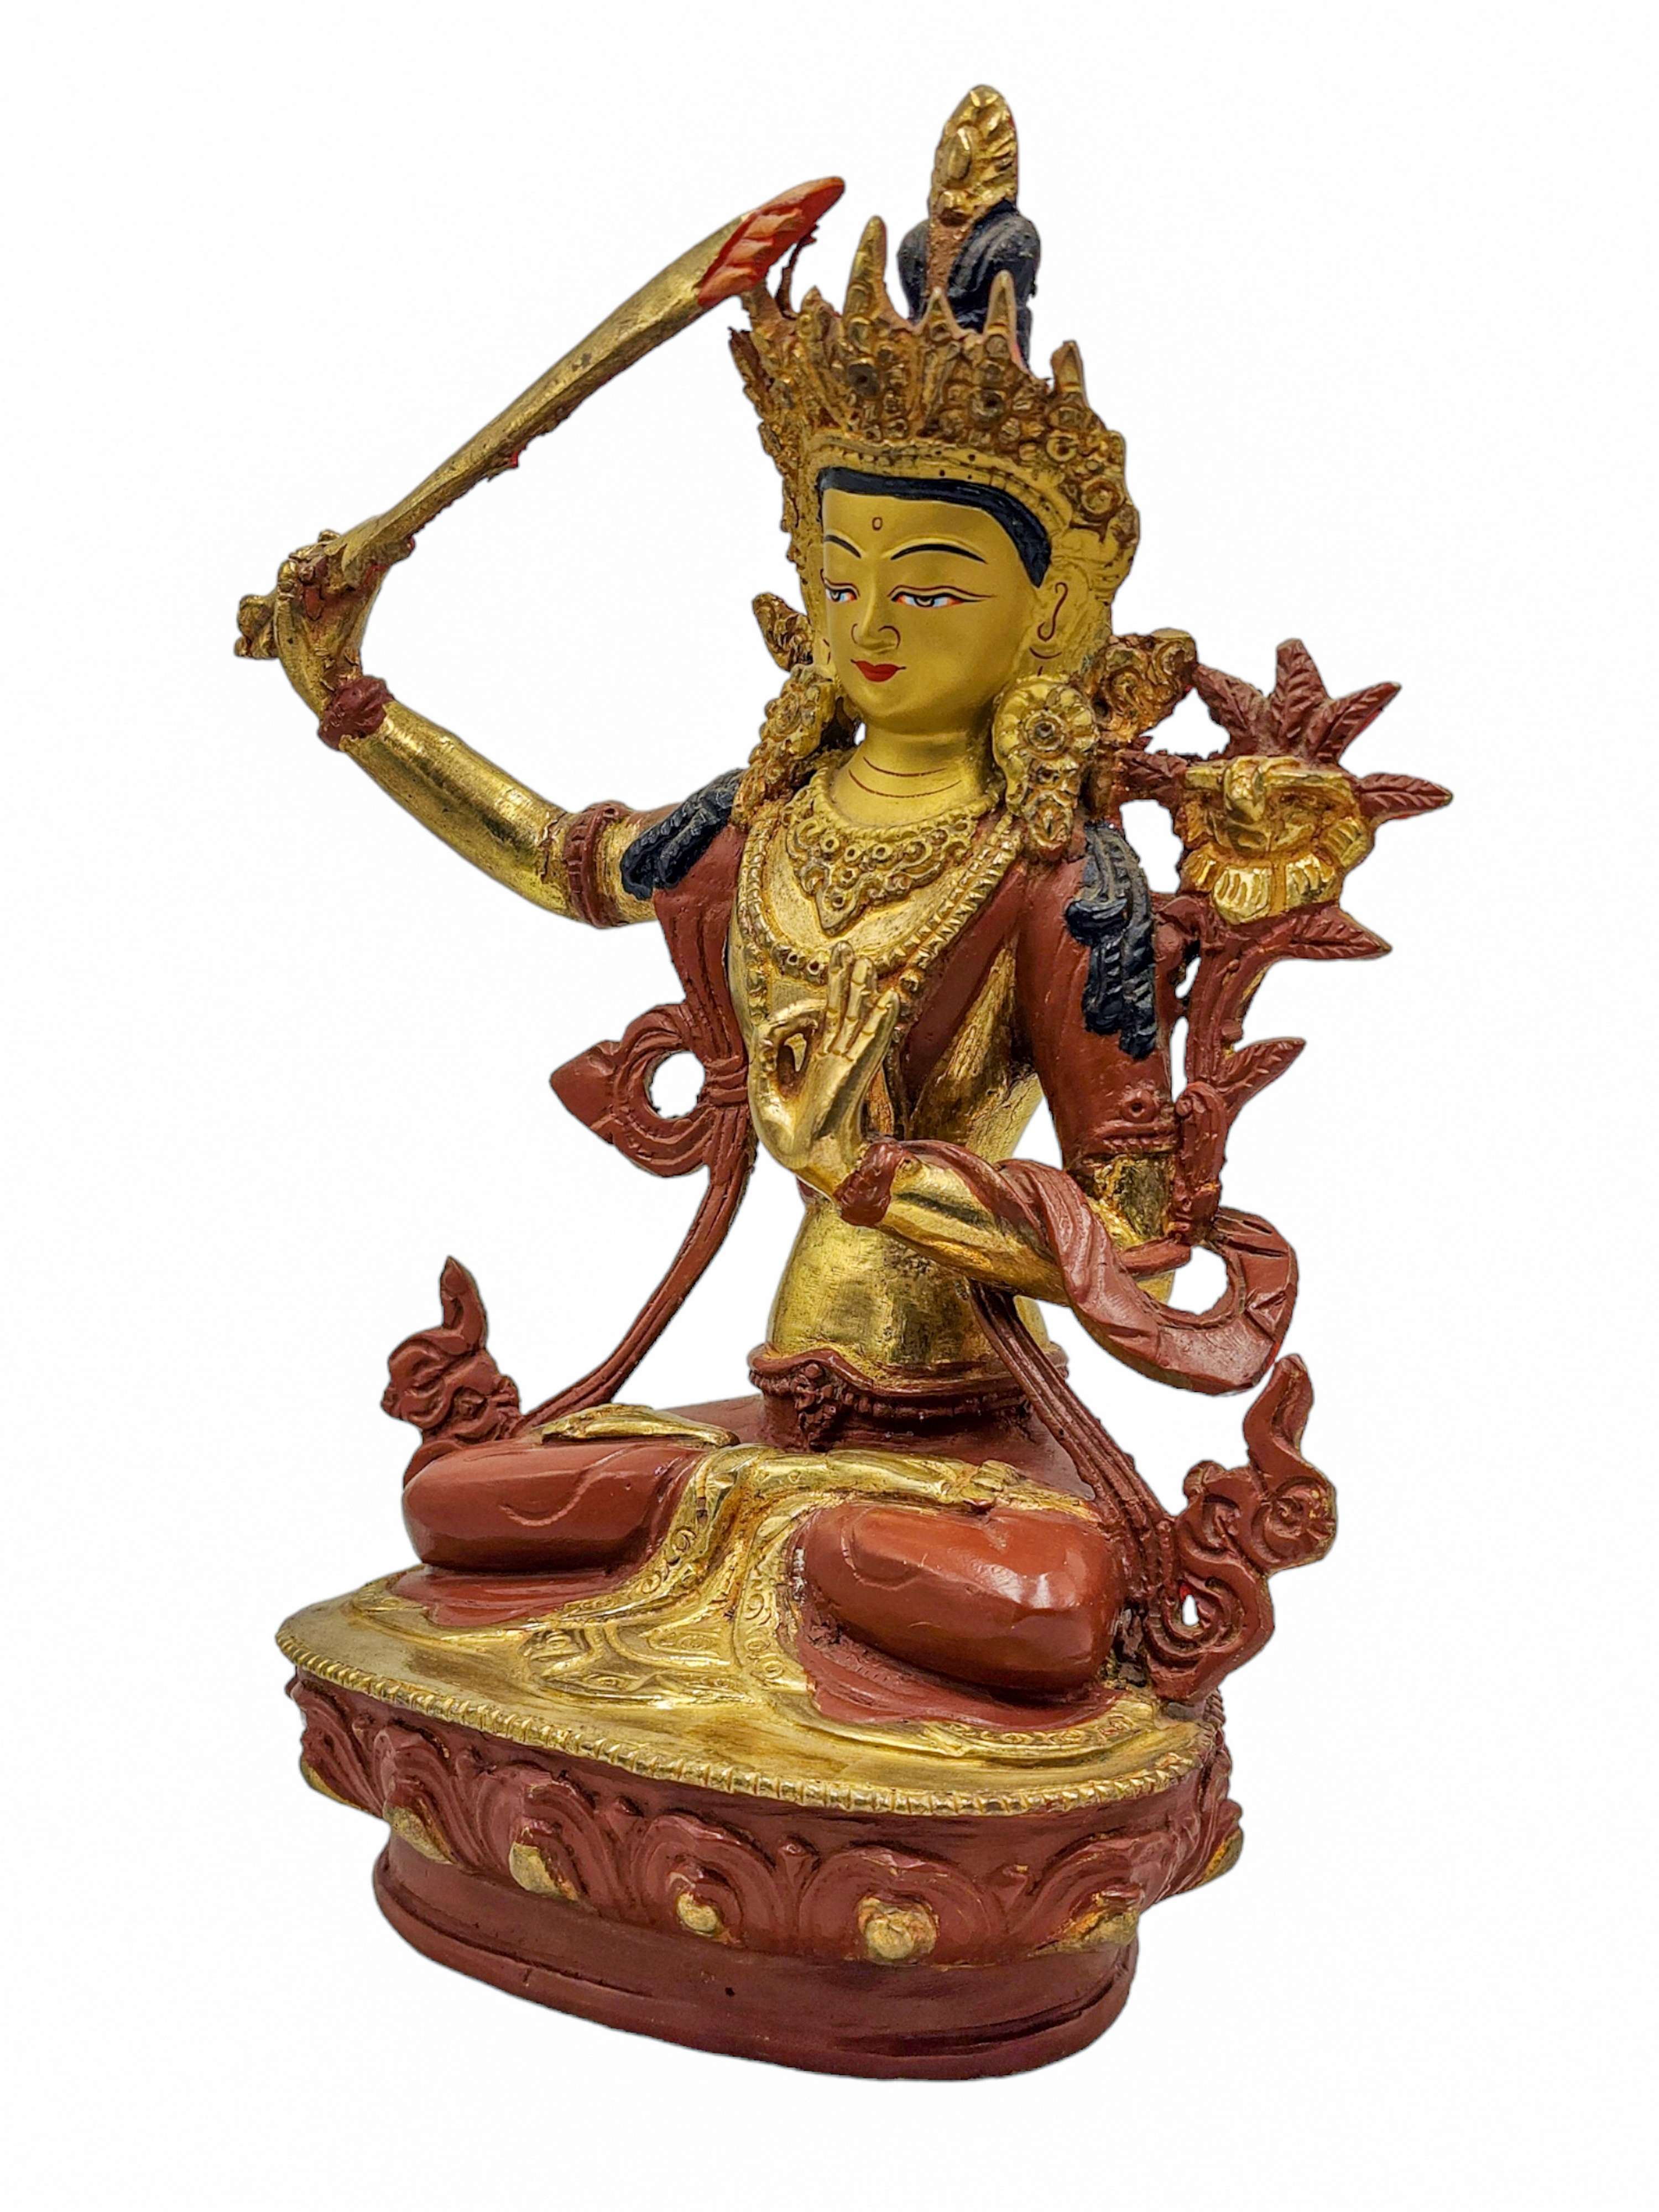 manjushree, Buddhist Handmade Statue, partly Gold Plated, Wtih face Painted